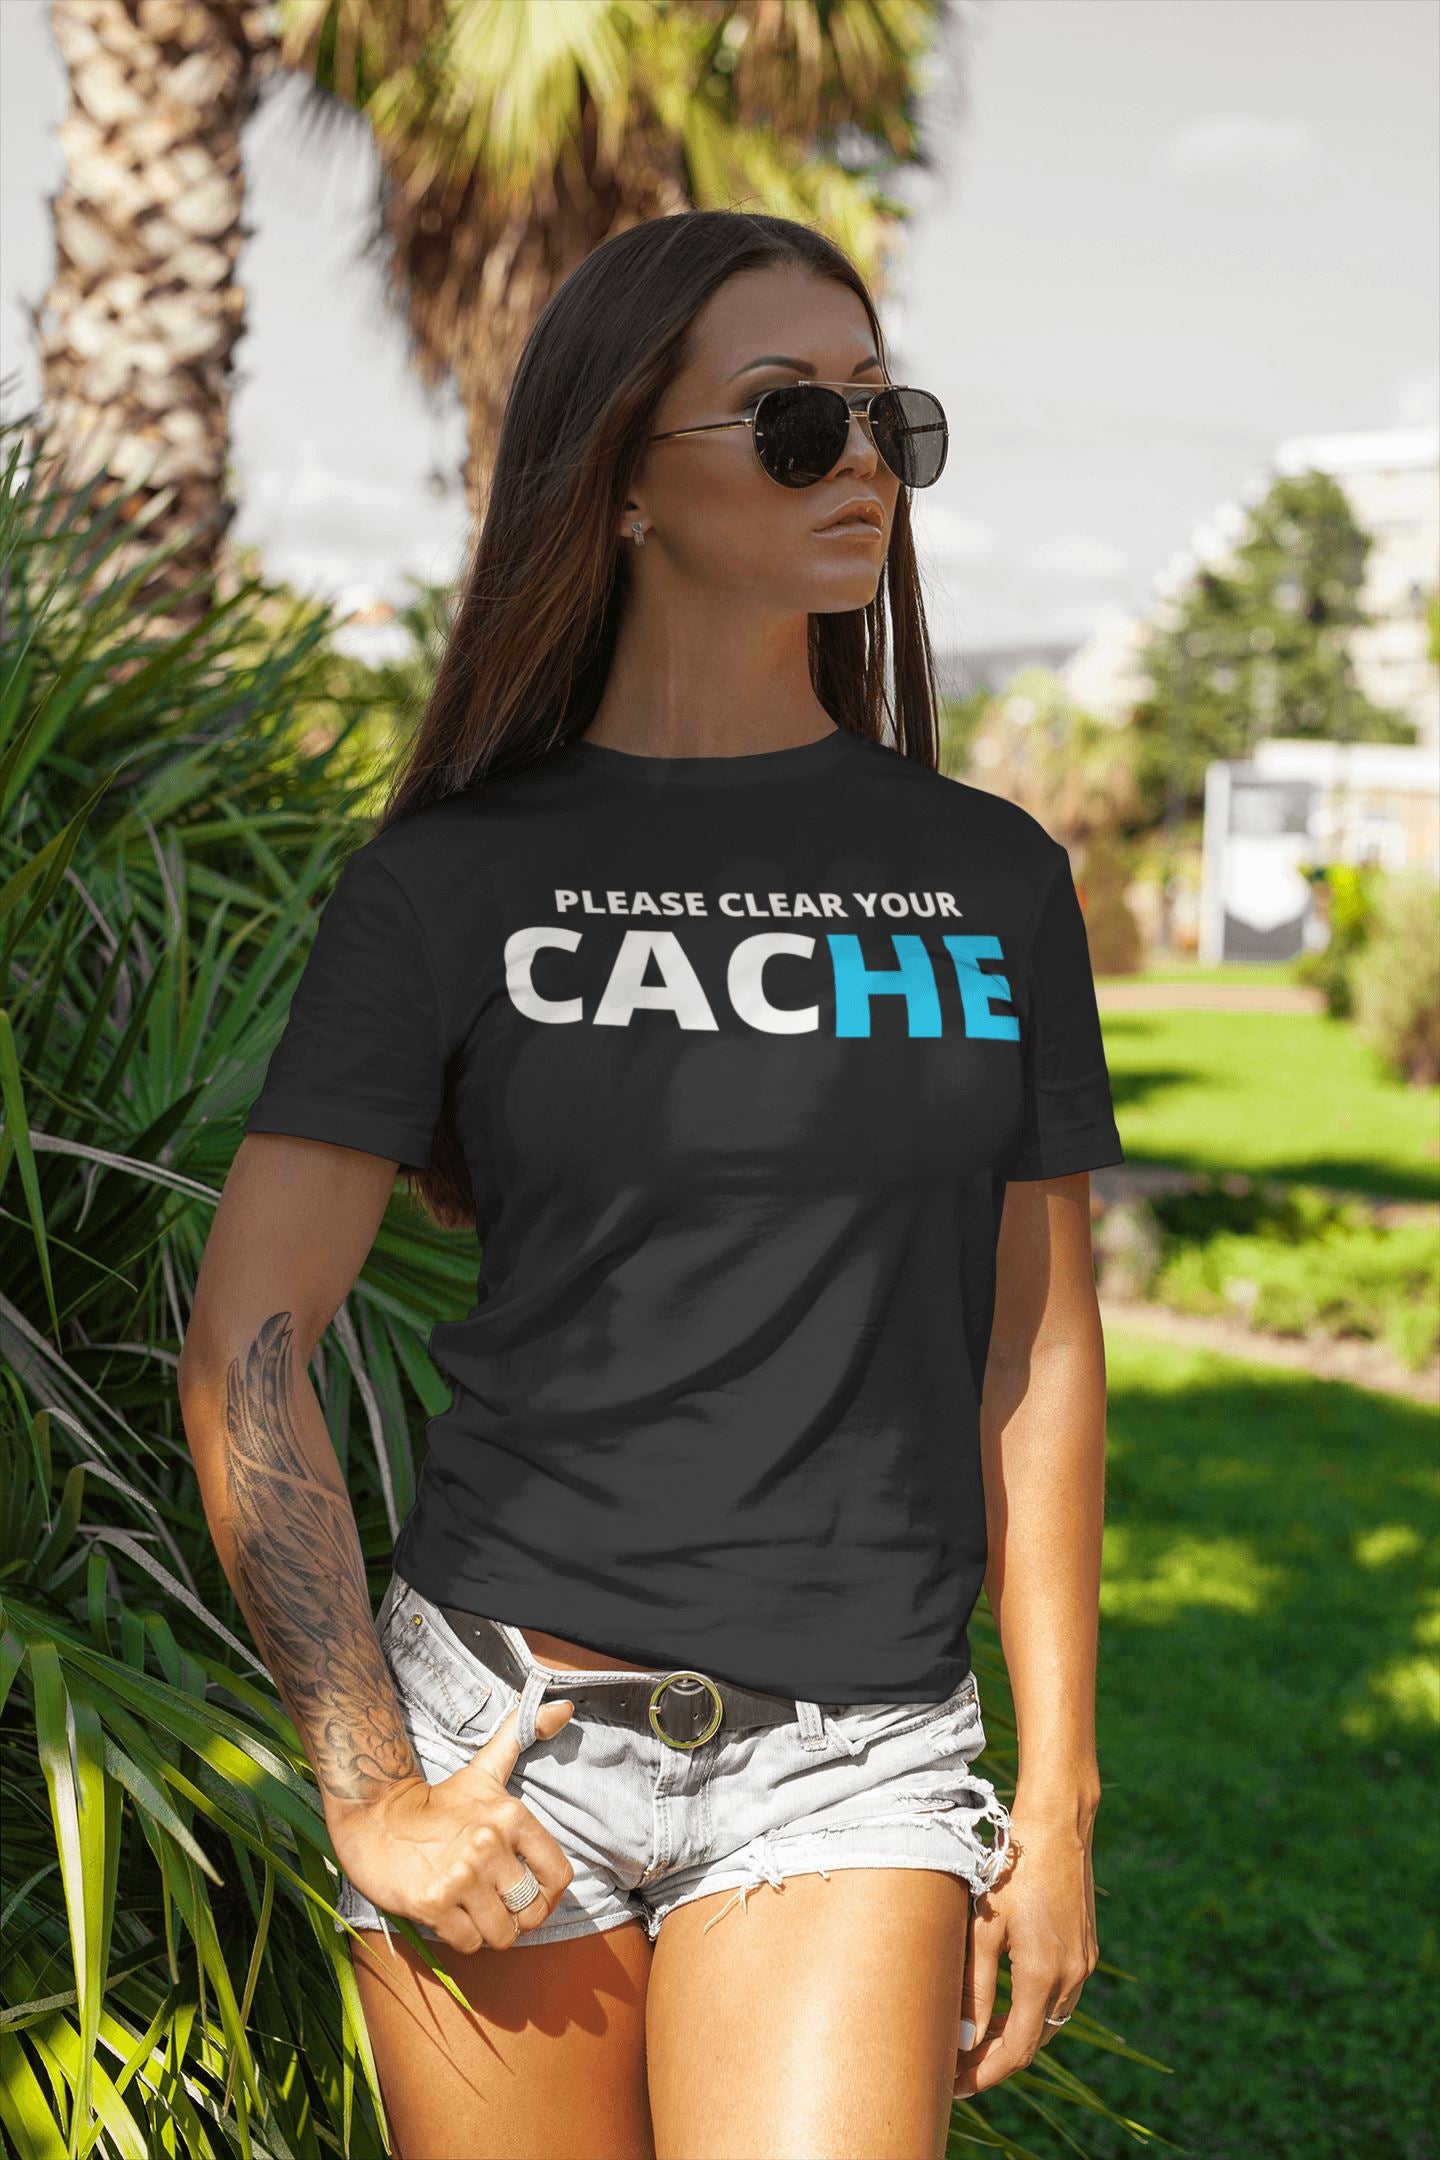 Please Clear Your Cache Exclusive T Shirt for Men and Women - Catch My Drift India Shirts & Tops black, clothing, computer science, engineer, engineering, it, made in india, shirt, t shirt, t